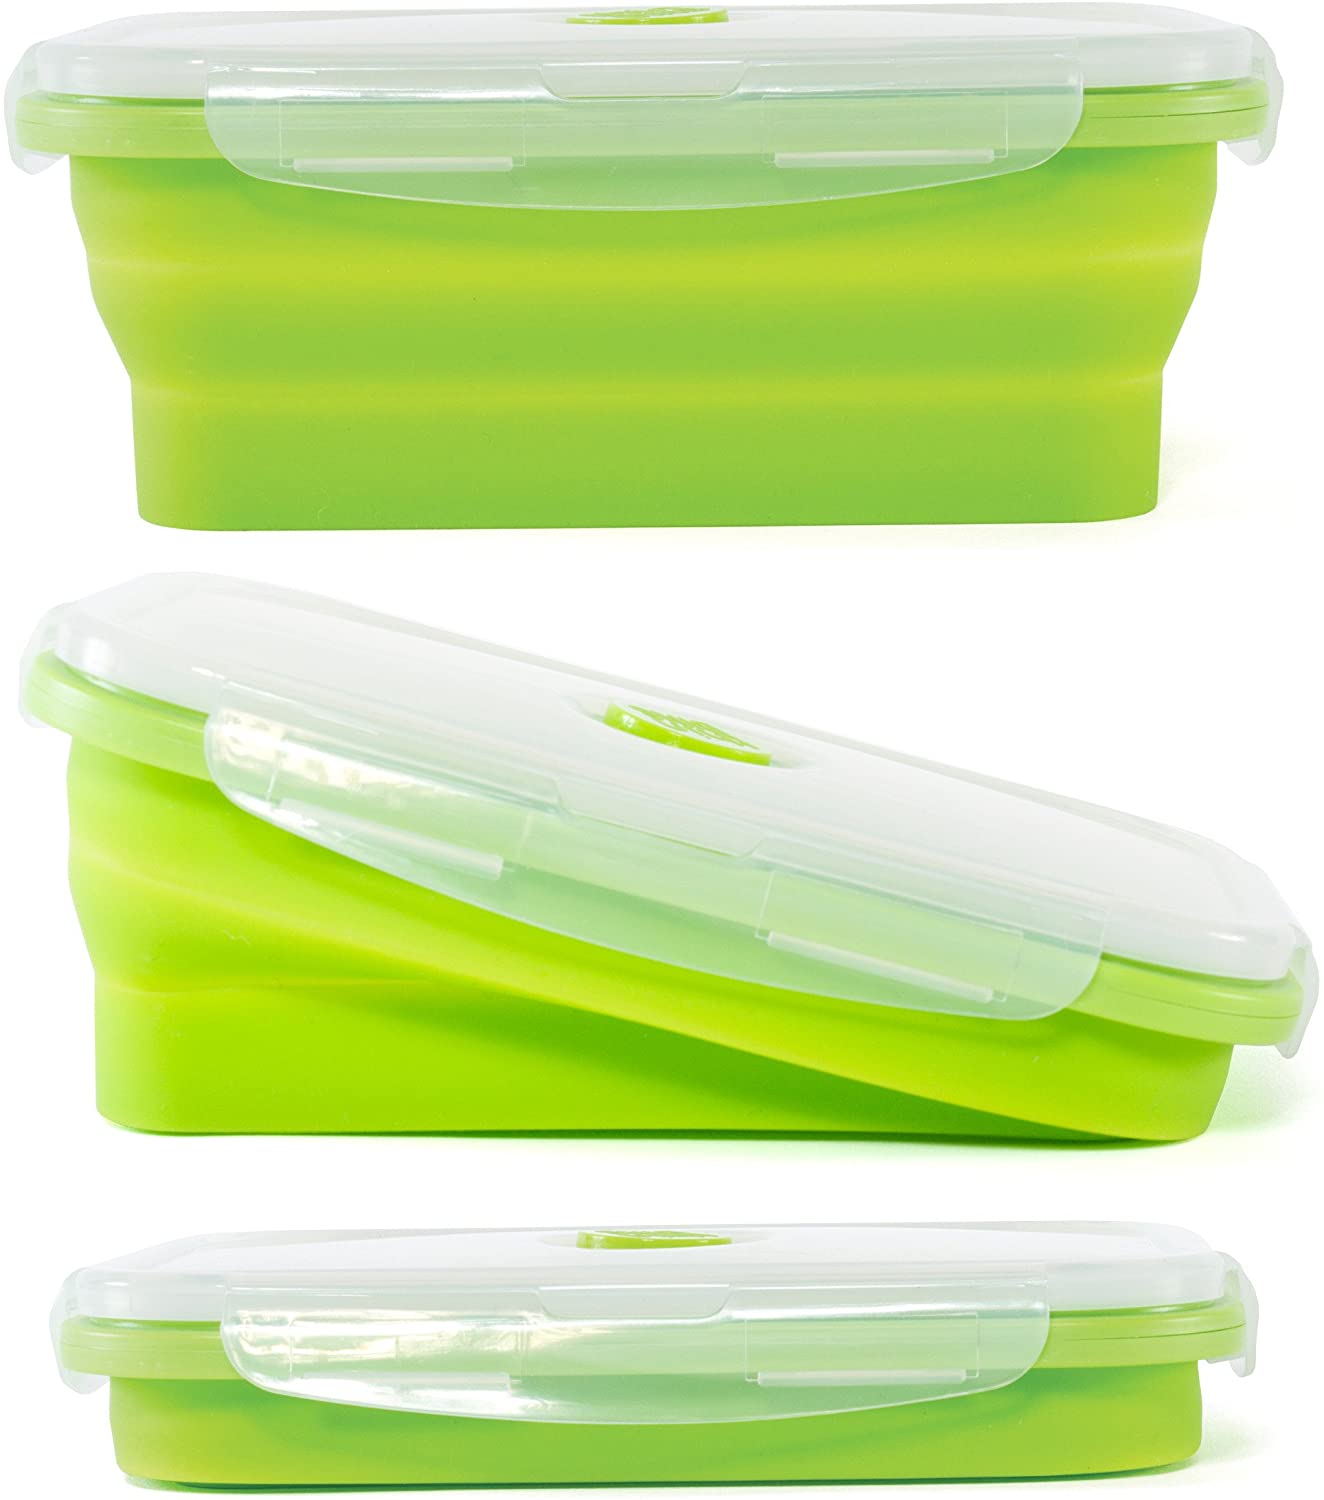 Thin Bins Collapsible Containers Set of 4 Rectangle Silicone Food Storage Containers BPA Free, Microwave, Dishwasher Safe - image 5 of 8